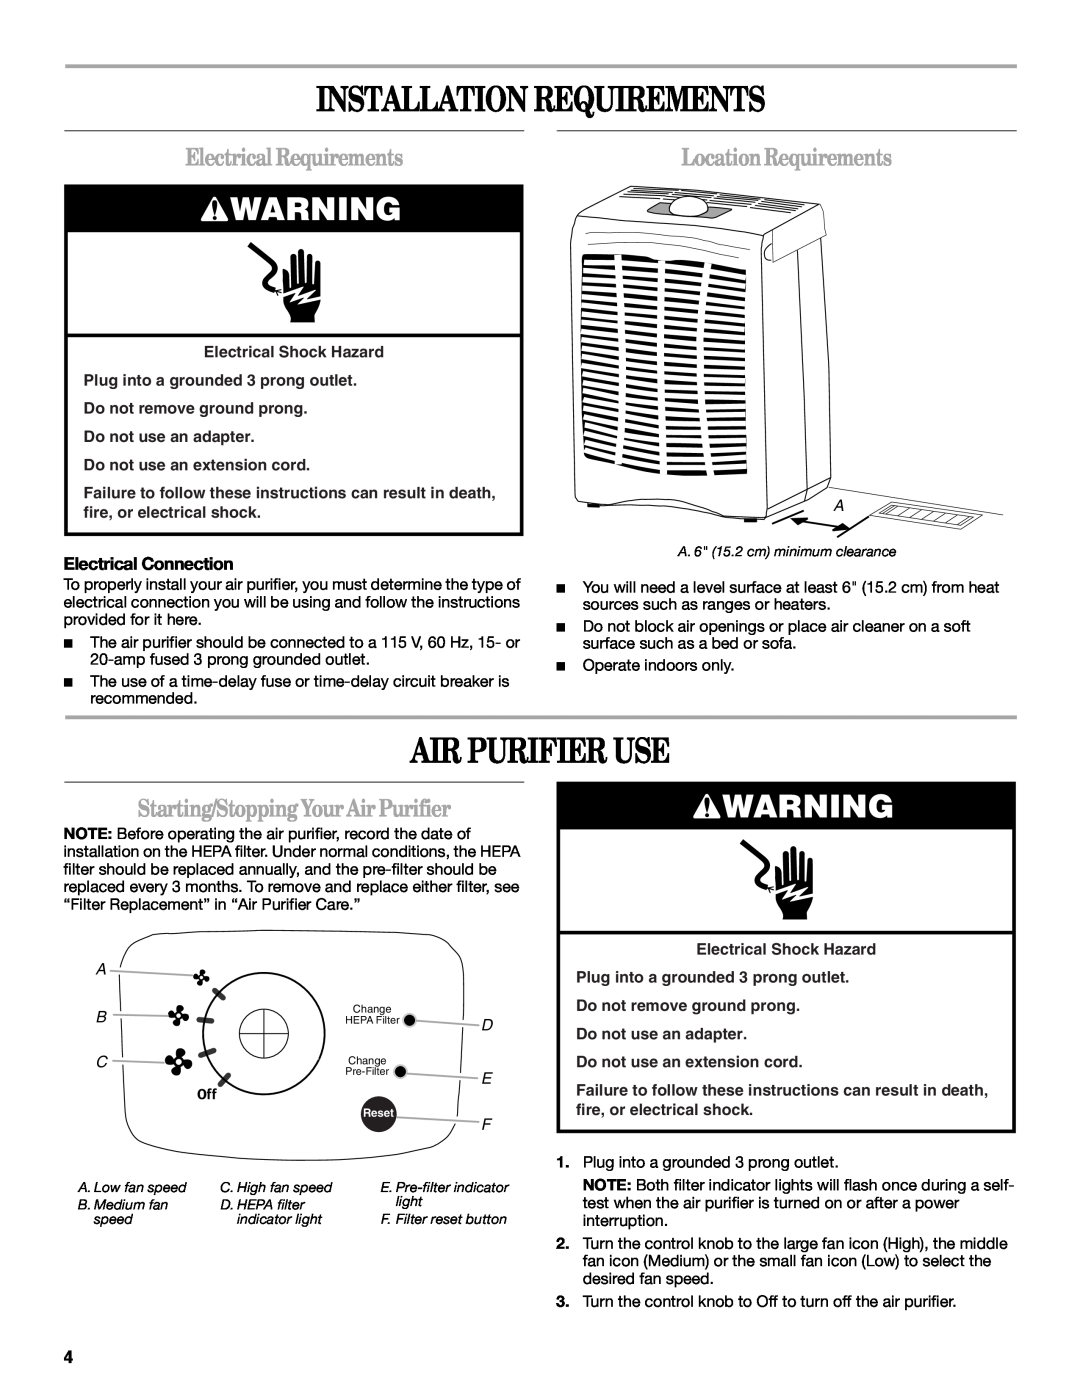 Maytag MT-AP250450 manual Installation Requirements, Air Purifier Use, Electrical Requirements, LocationRequirements 